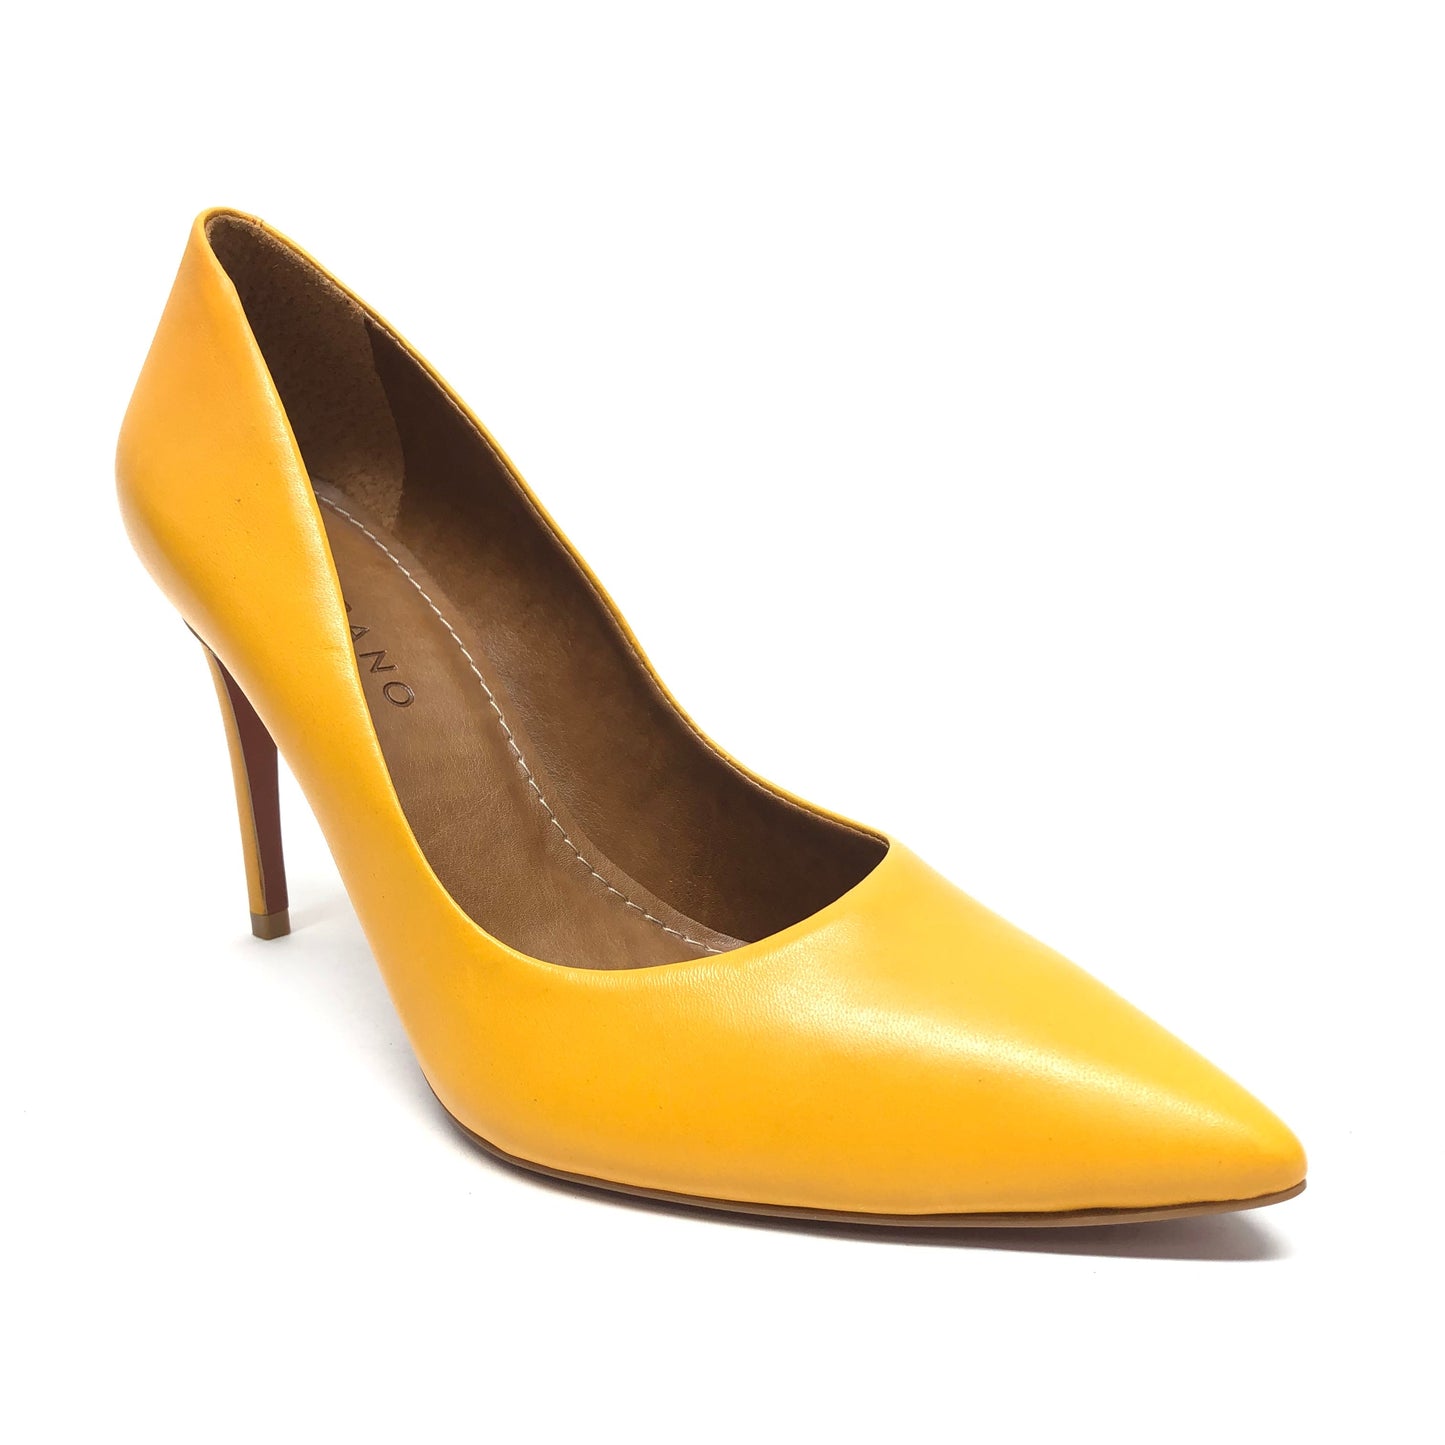 Yellow Shoes Heels Stiletto Cmb, Size 11